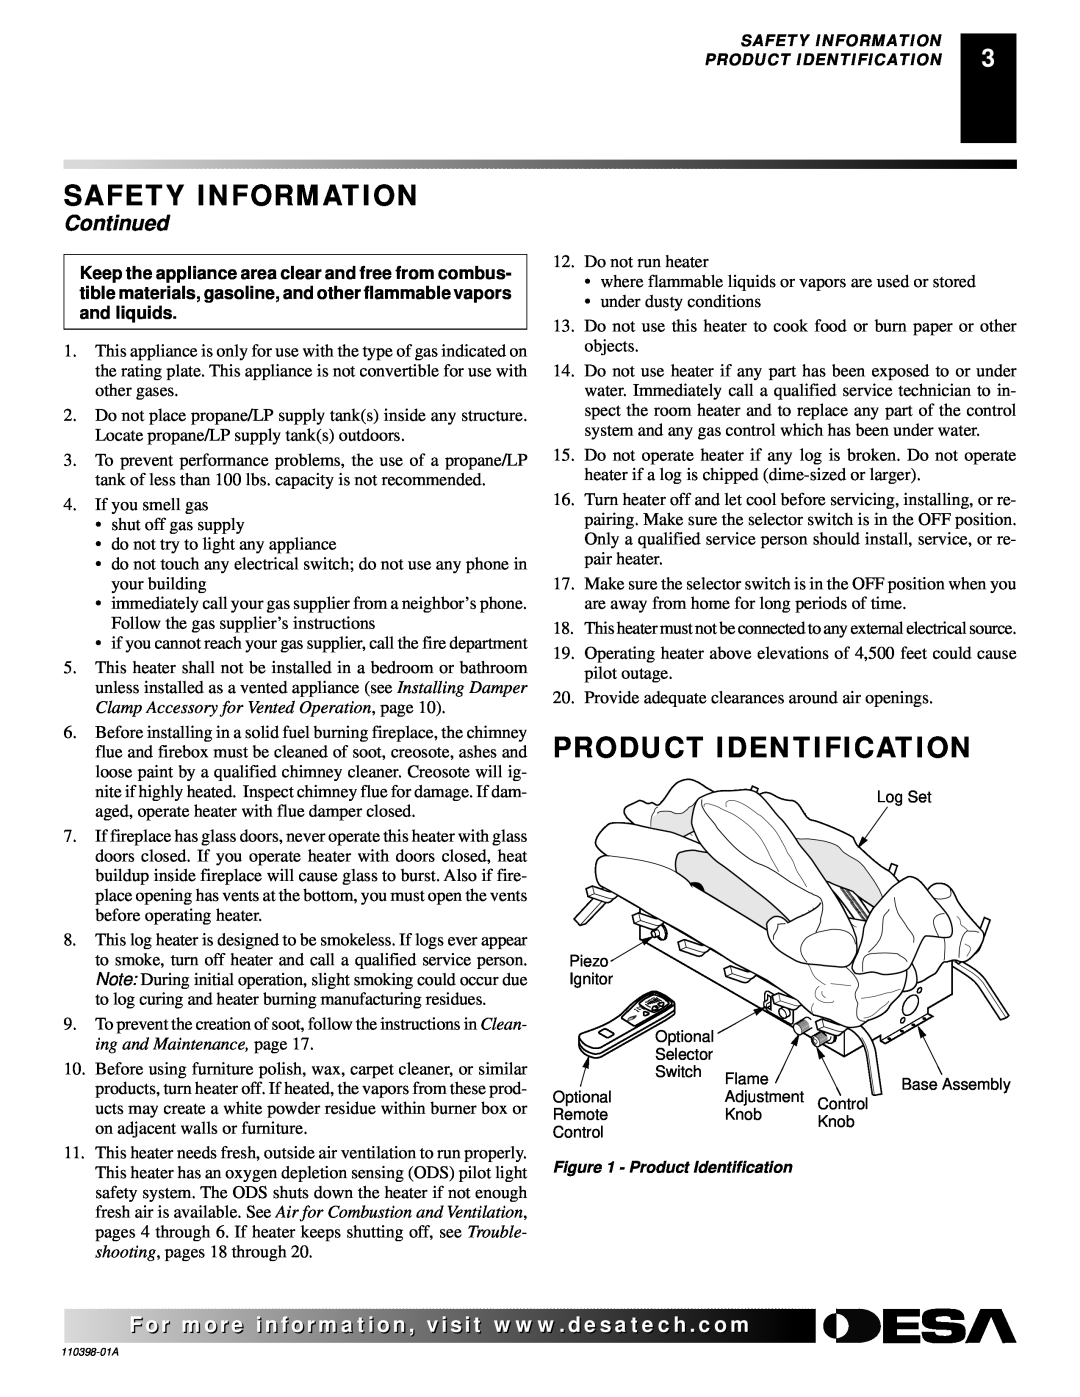 Desa VYM27NRPR installation manual Product Identification, Continued, Safety Information 